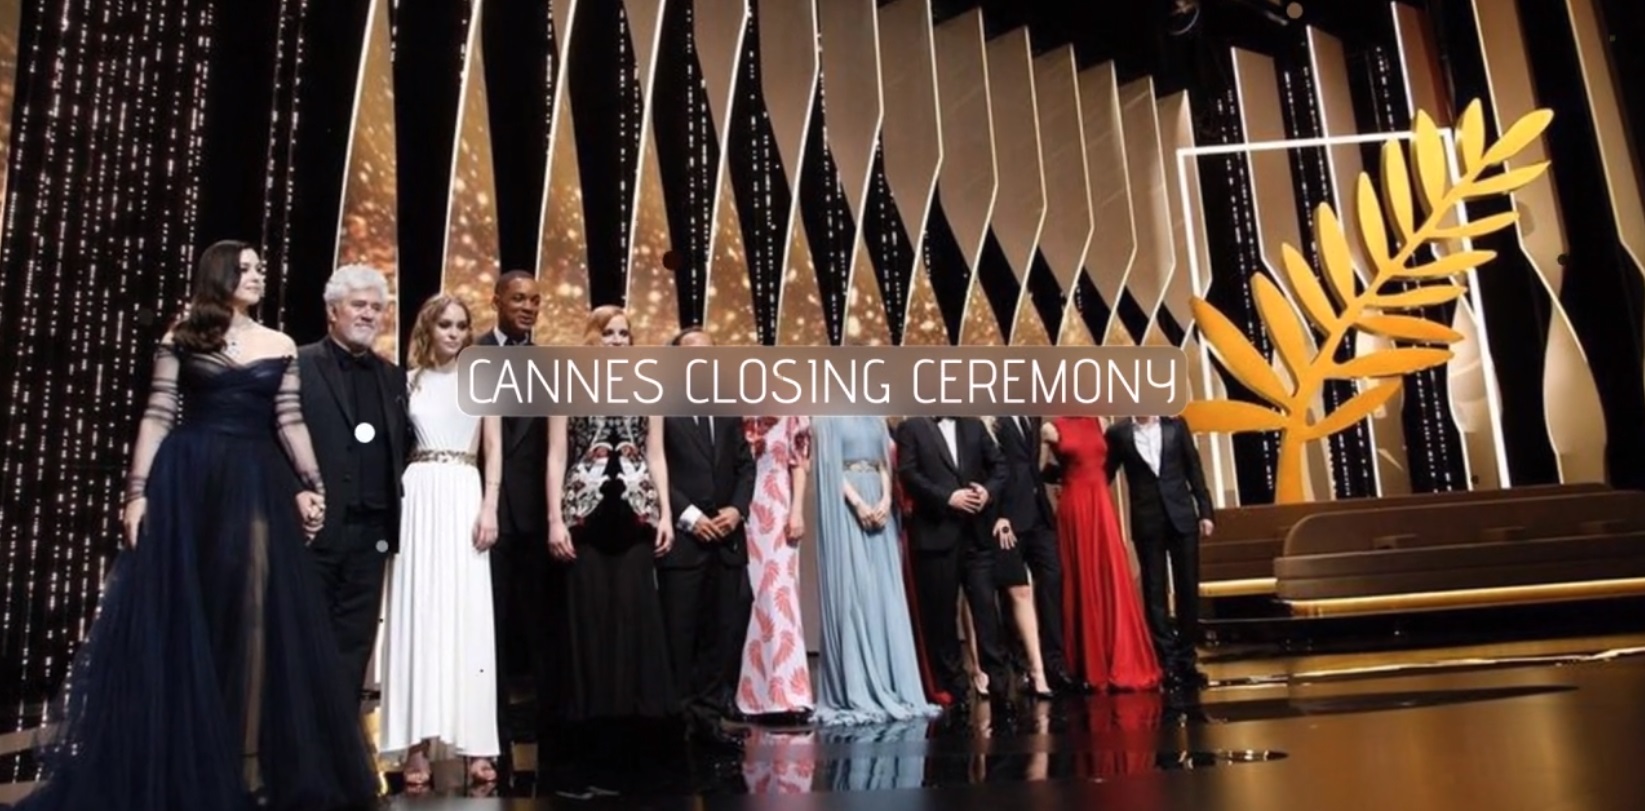 buy orchestra tickets to cannes closing cermeony and afterparty